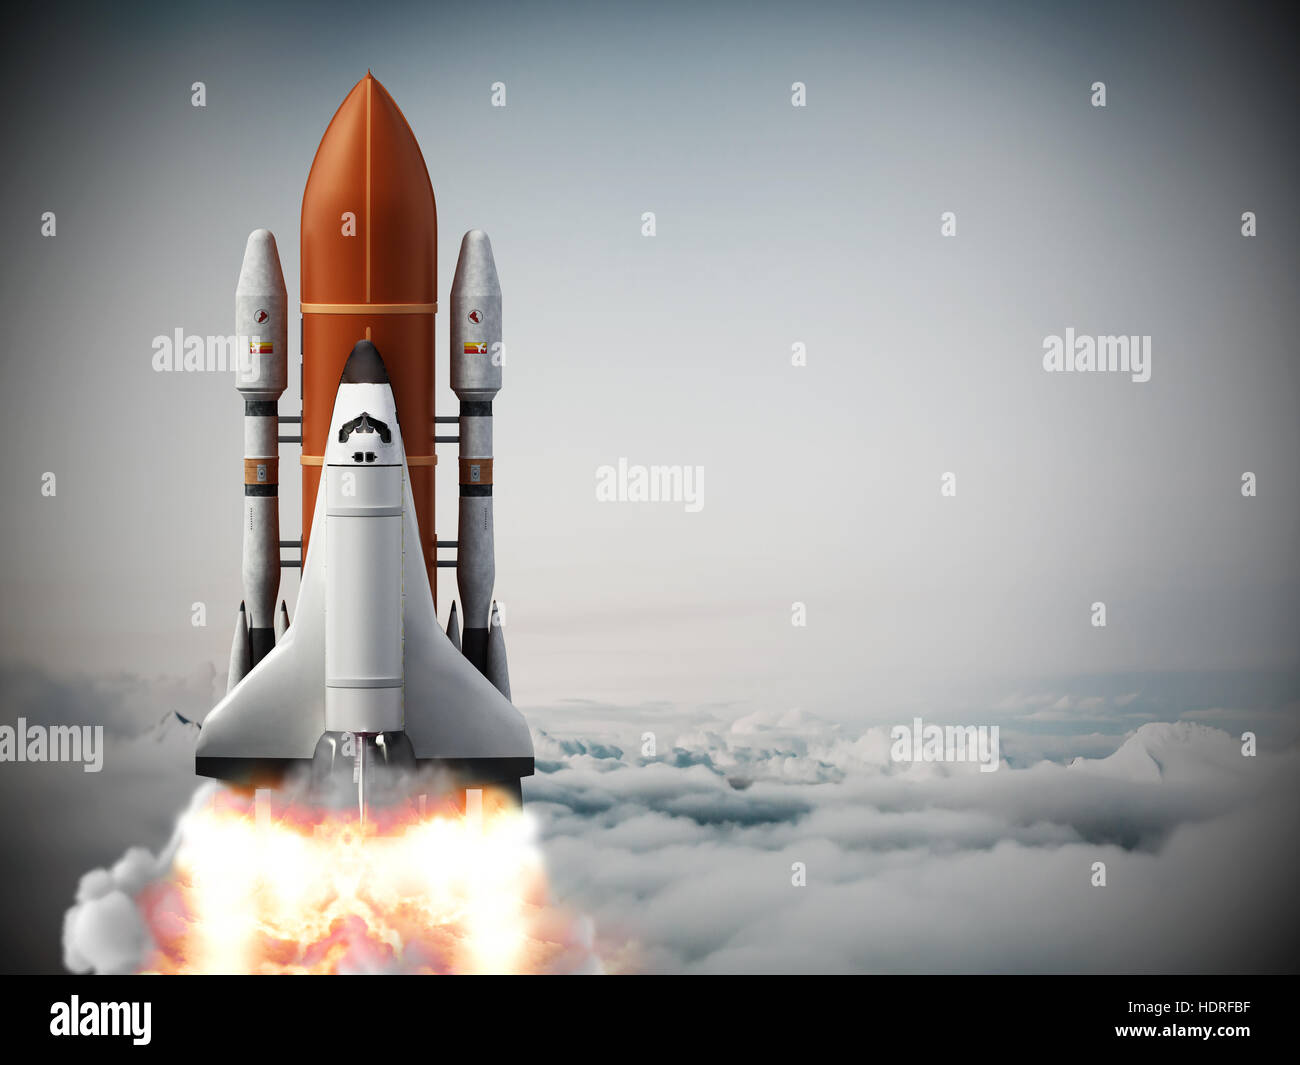 Rocket carrying space shuttle launches off. 3D illustration. Stock Photo